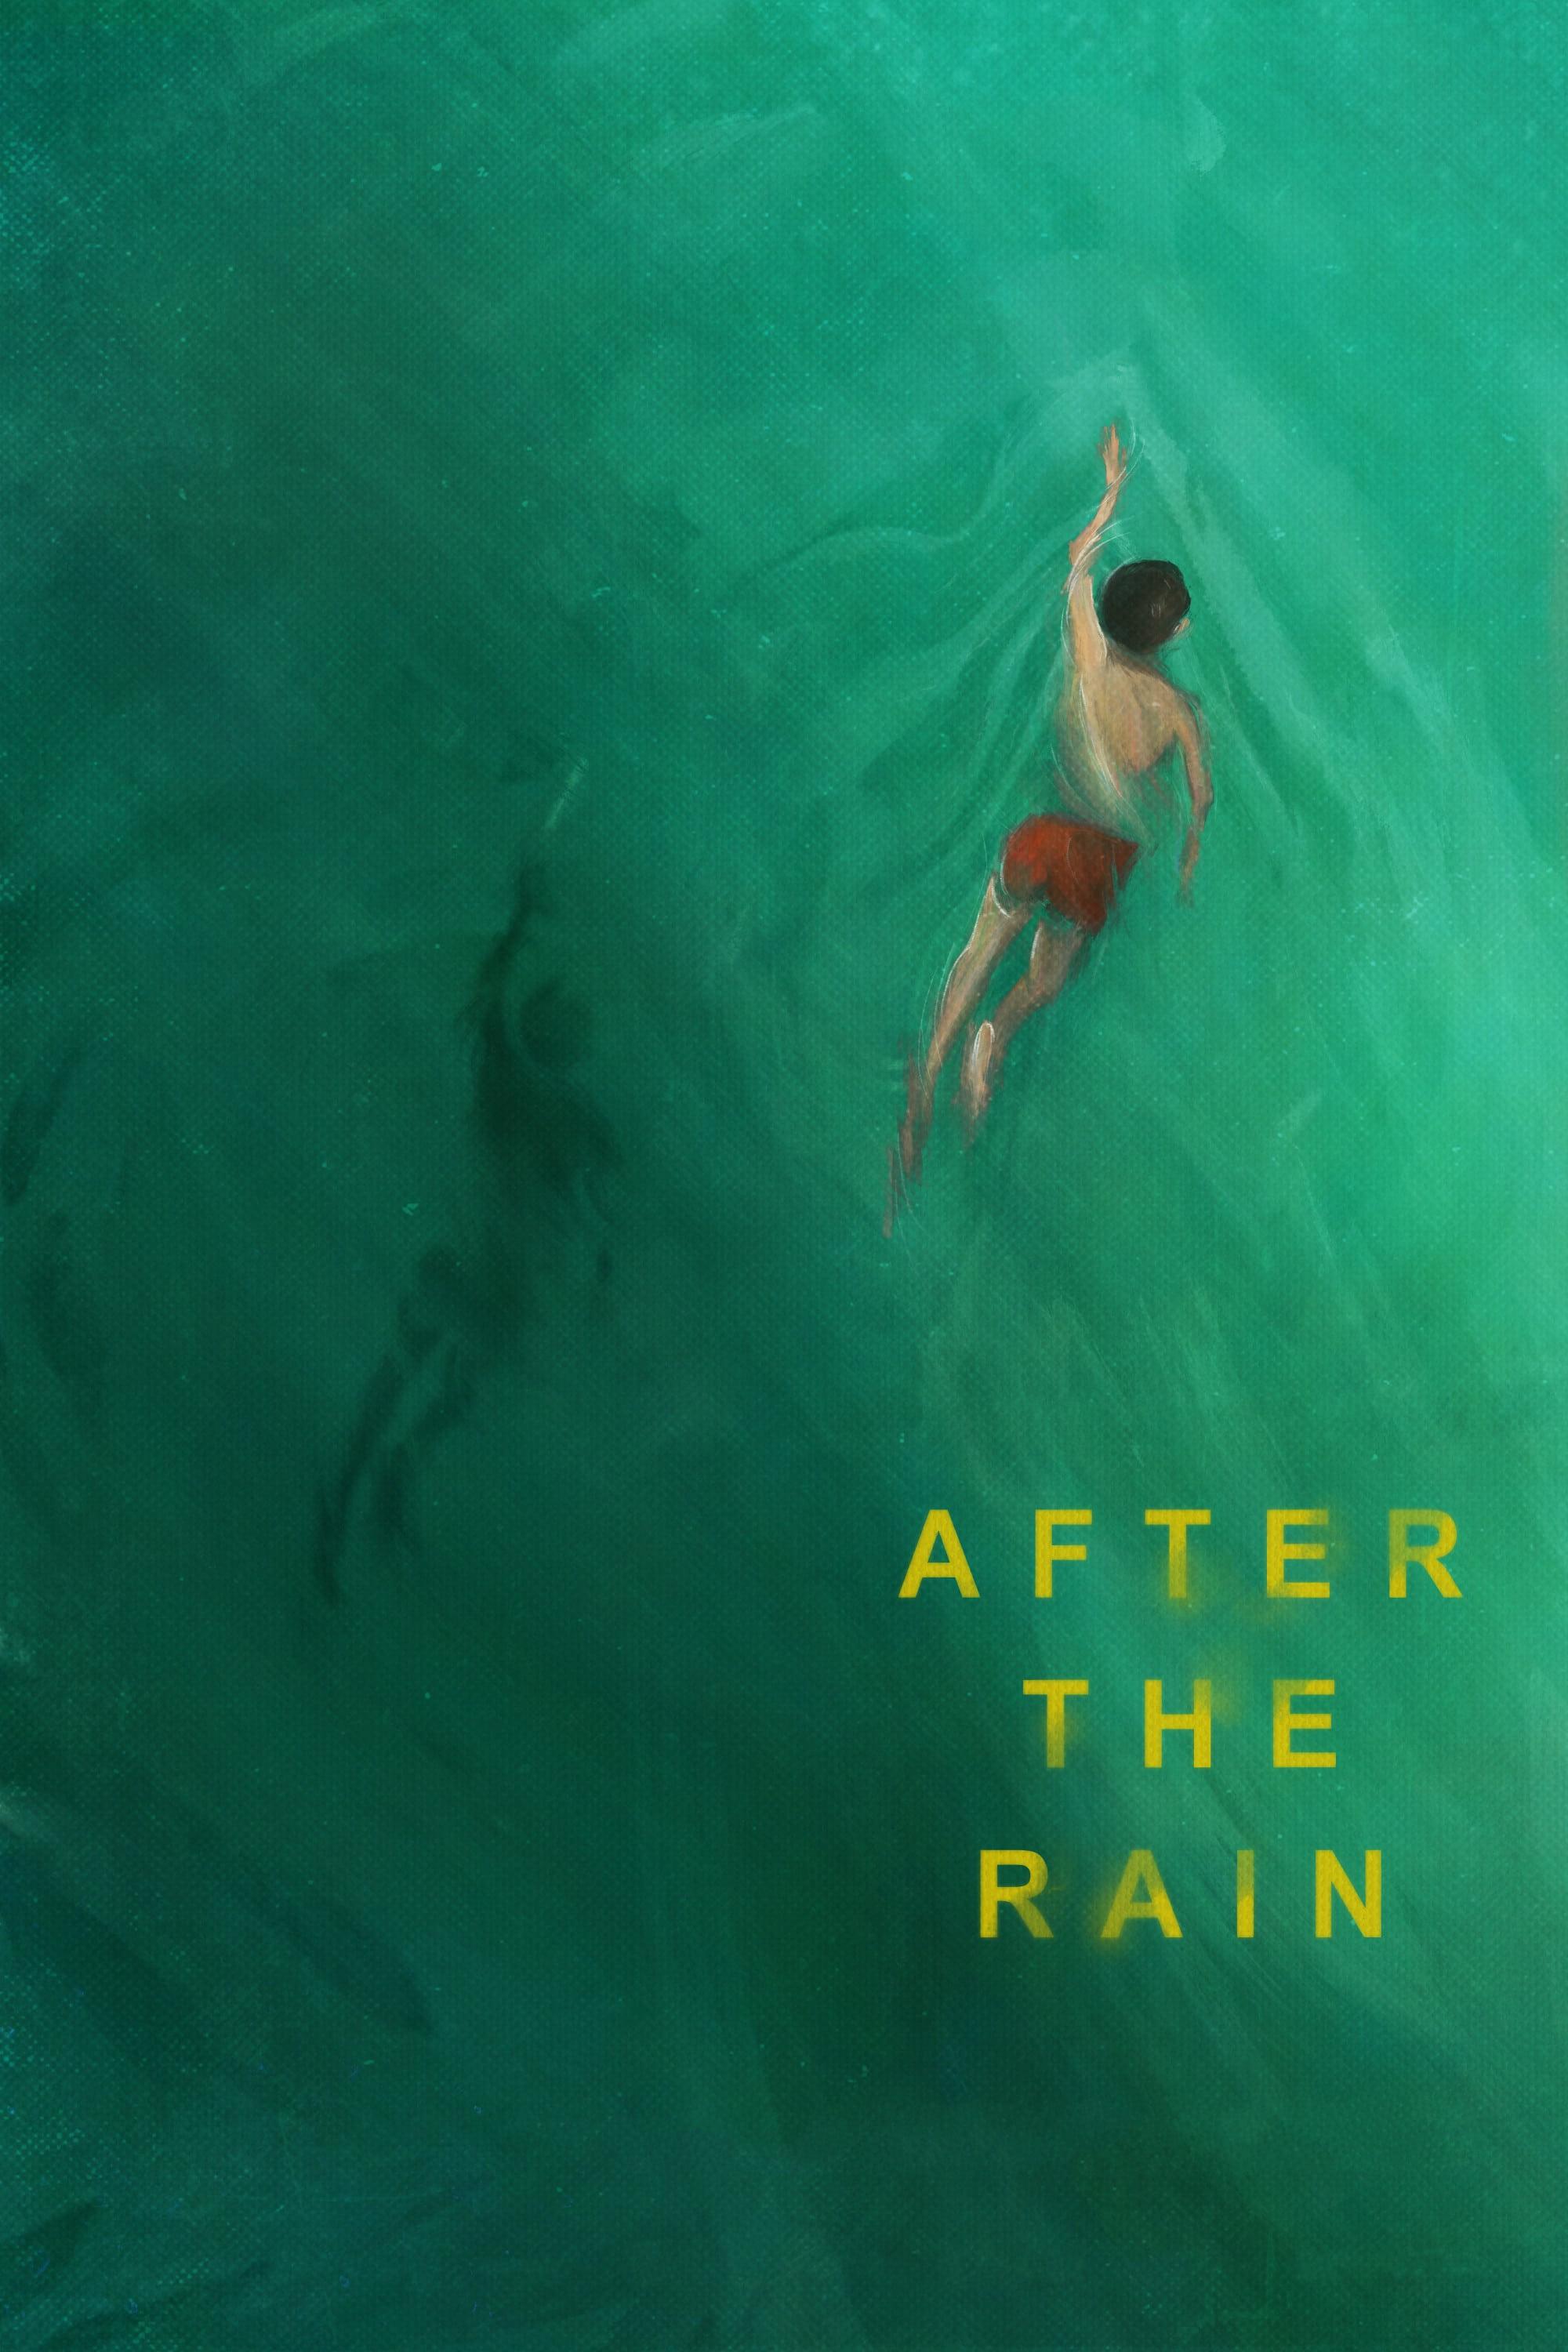 After the Rain poster